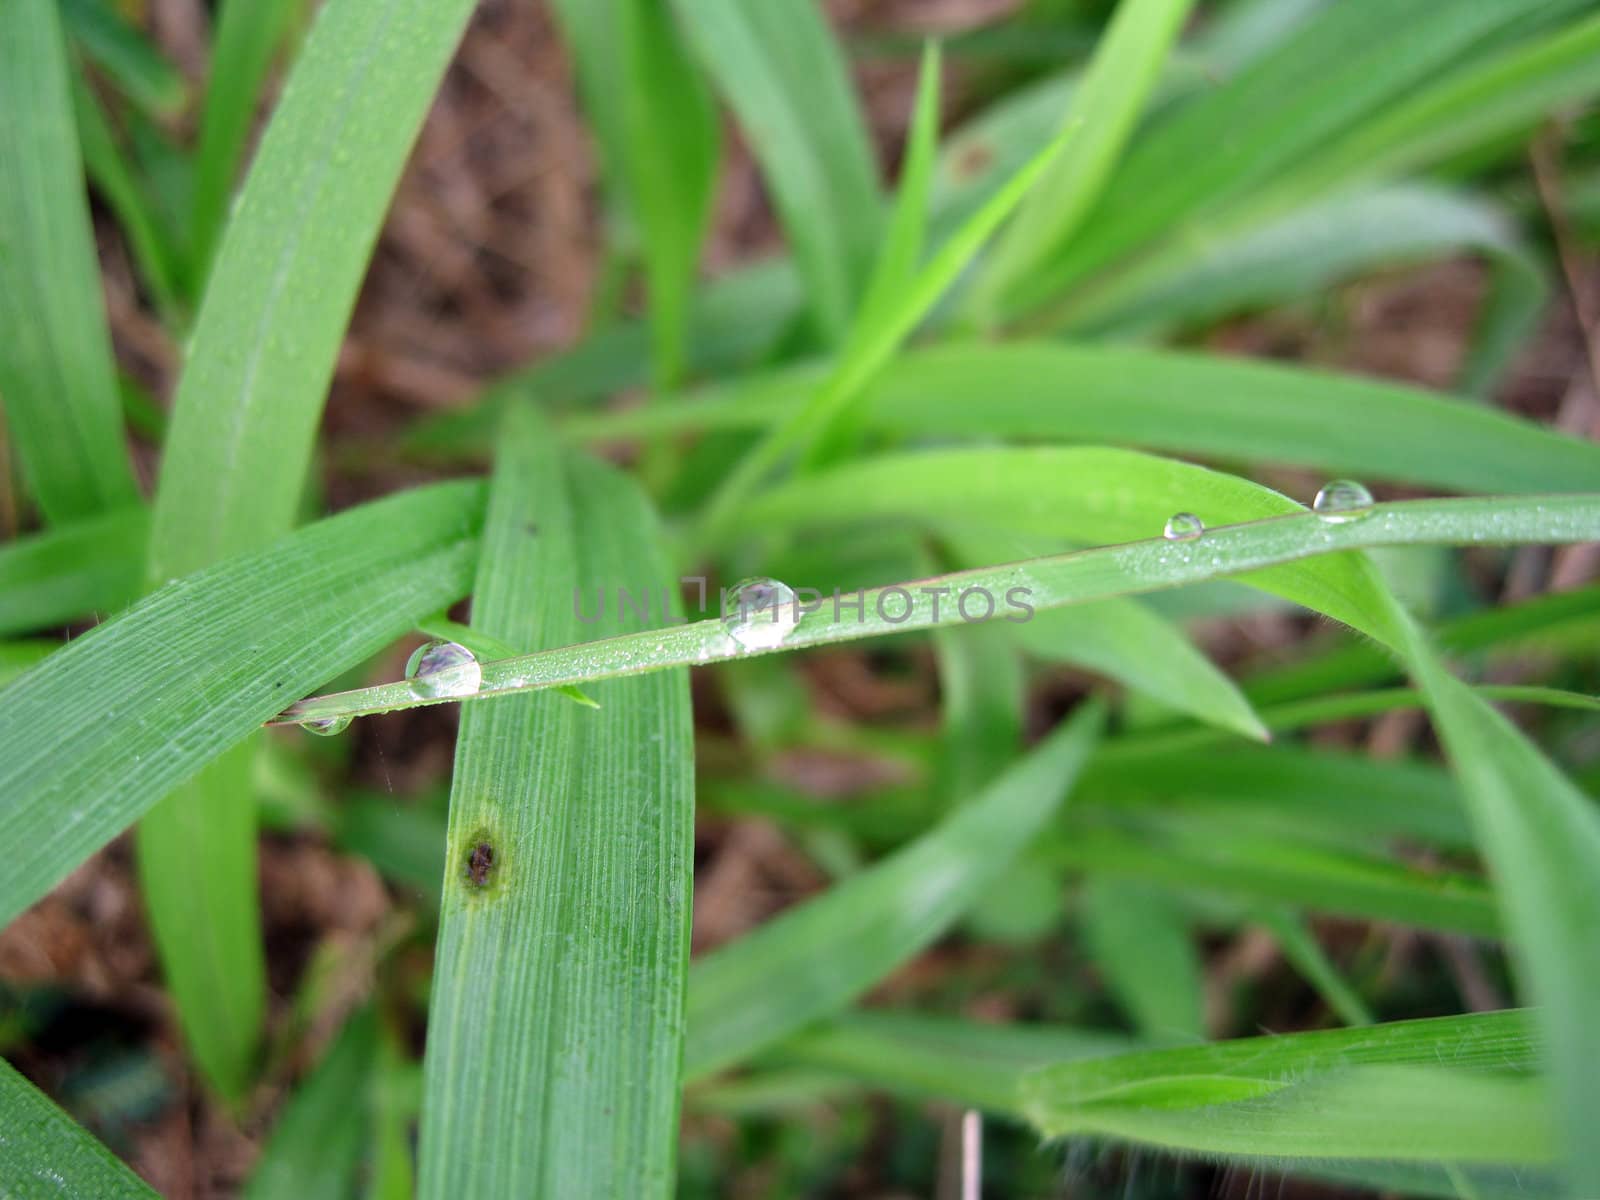 dewdrop on the grass in the field 